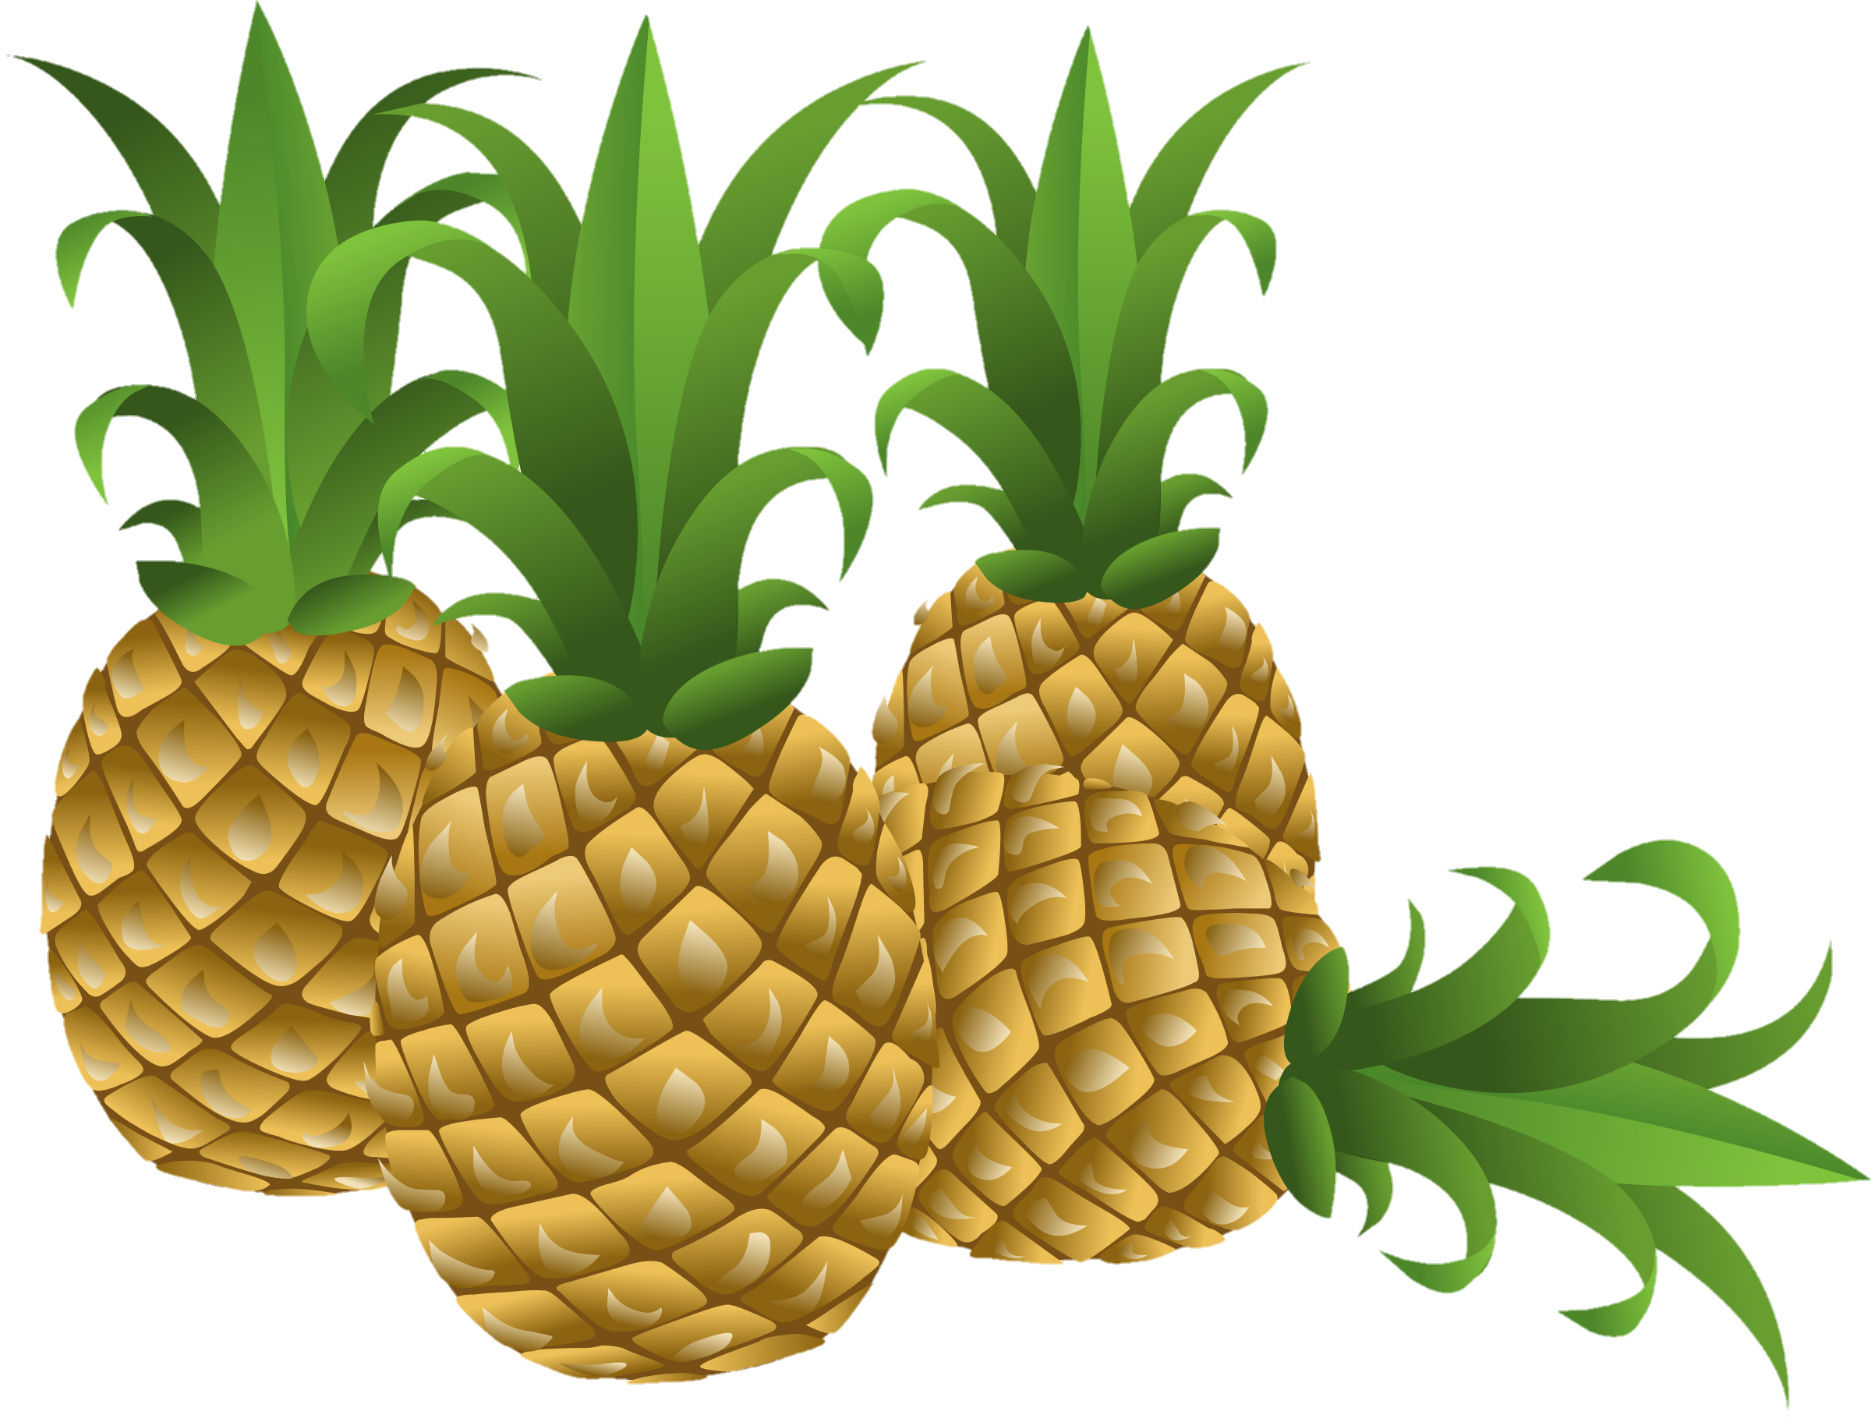 pineapple-png-image-from-pngfre-51